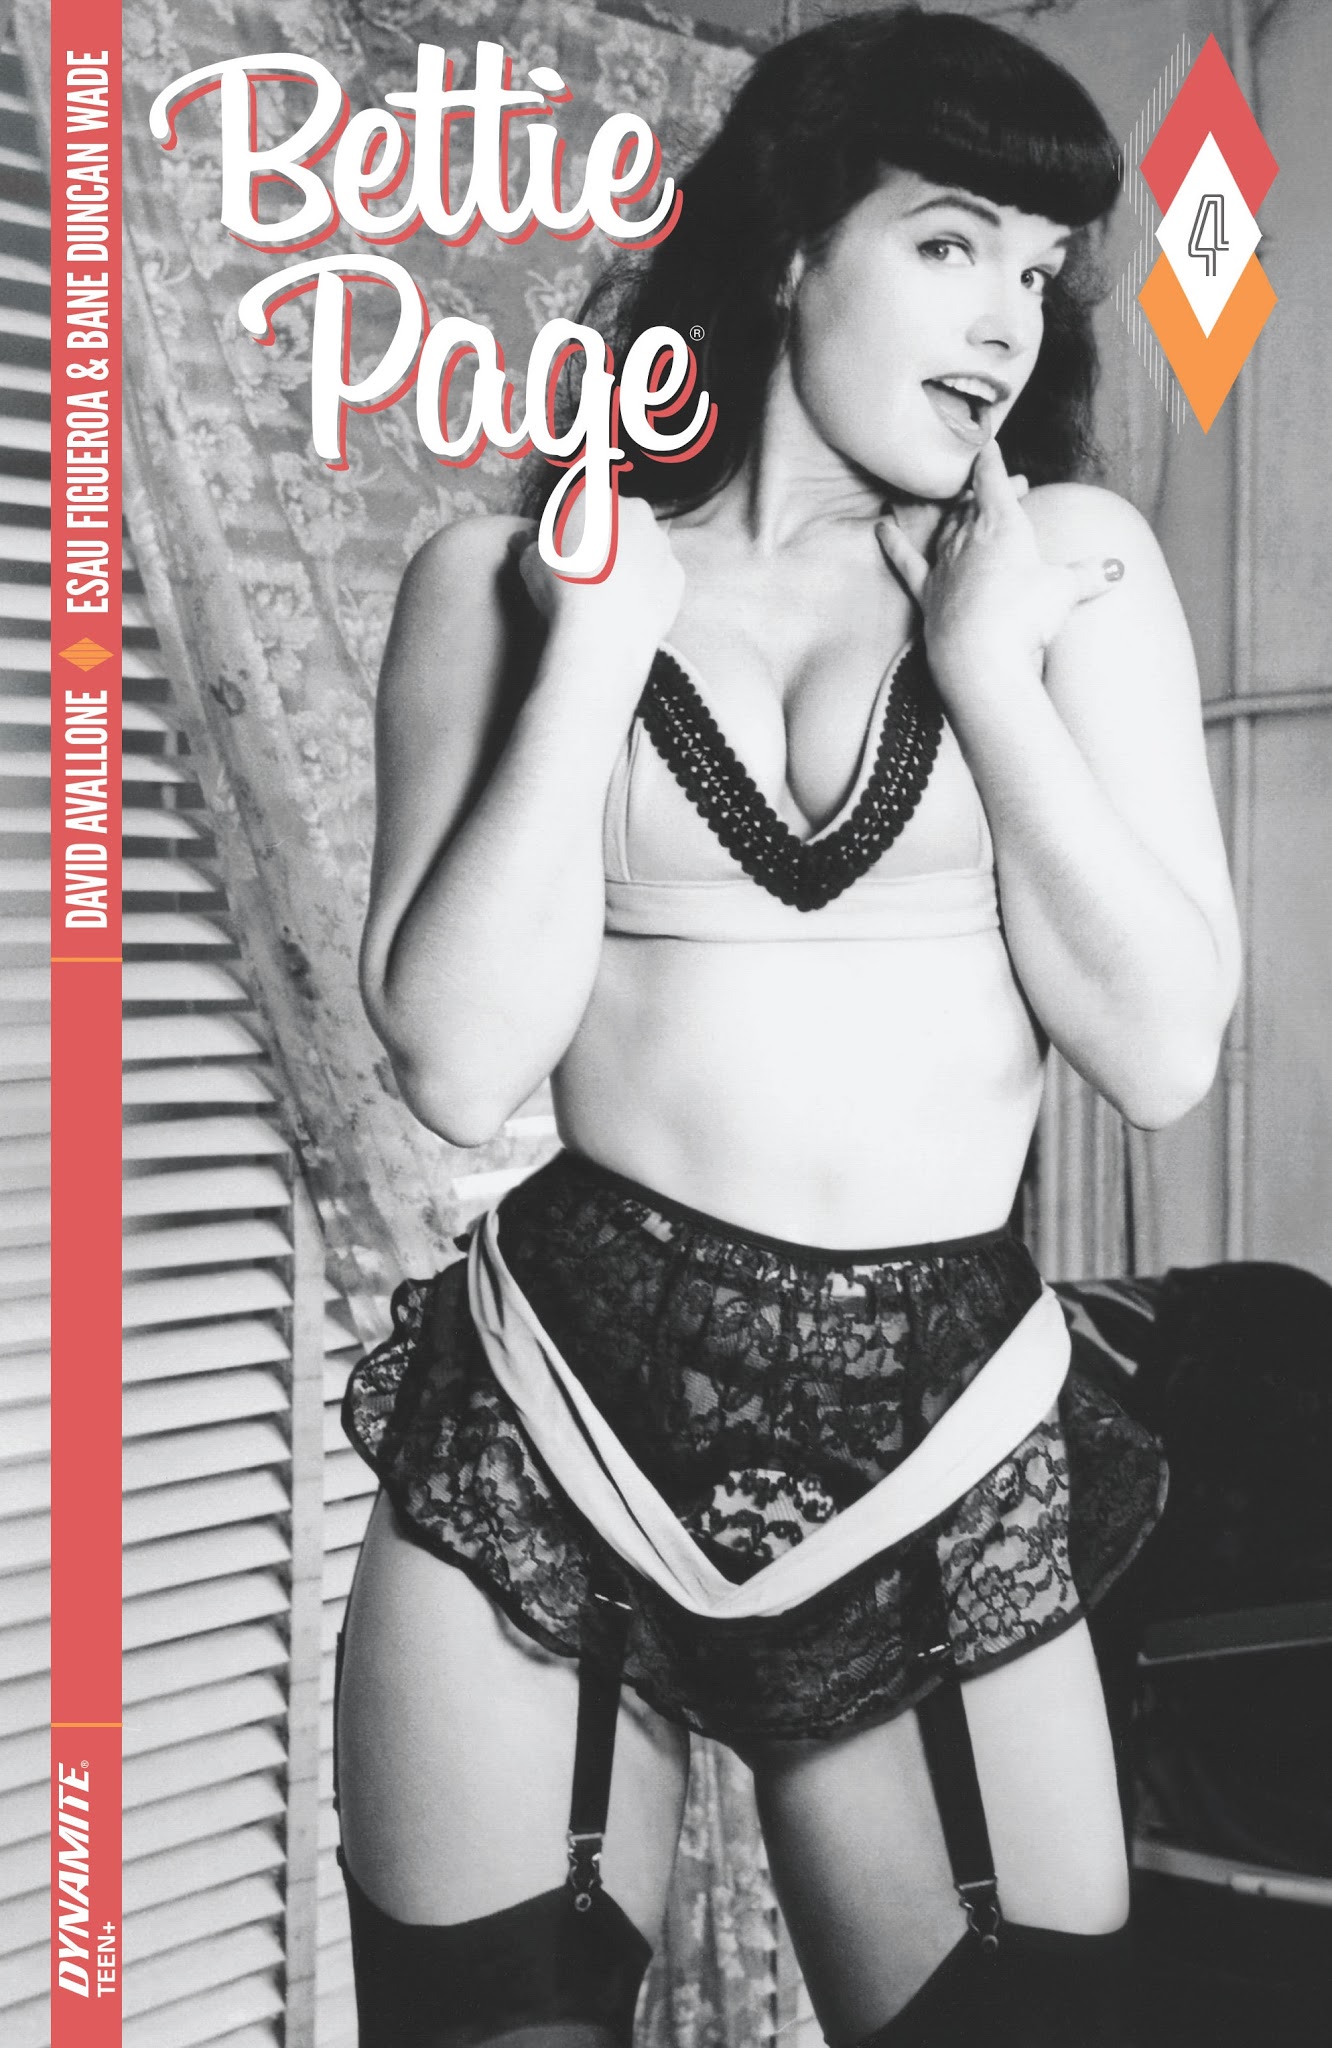 Read online Bettie Page comic -  Issue #4 - 3